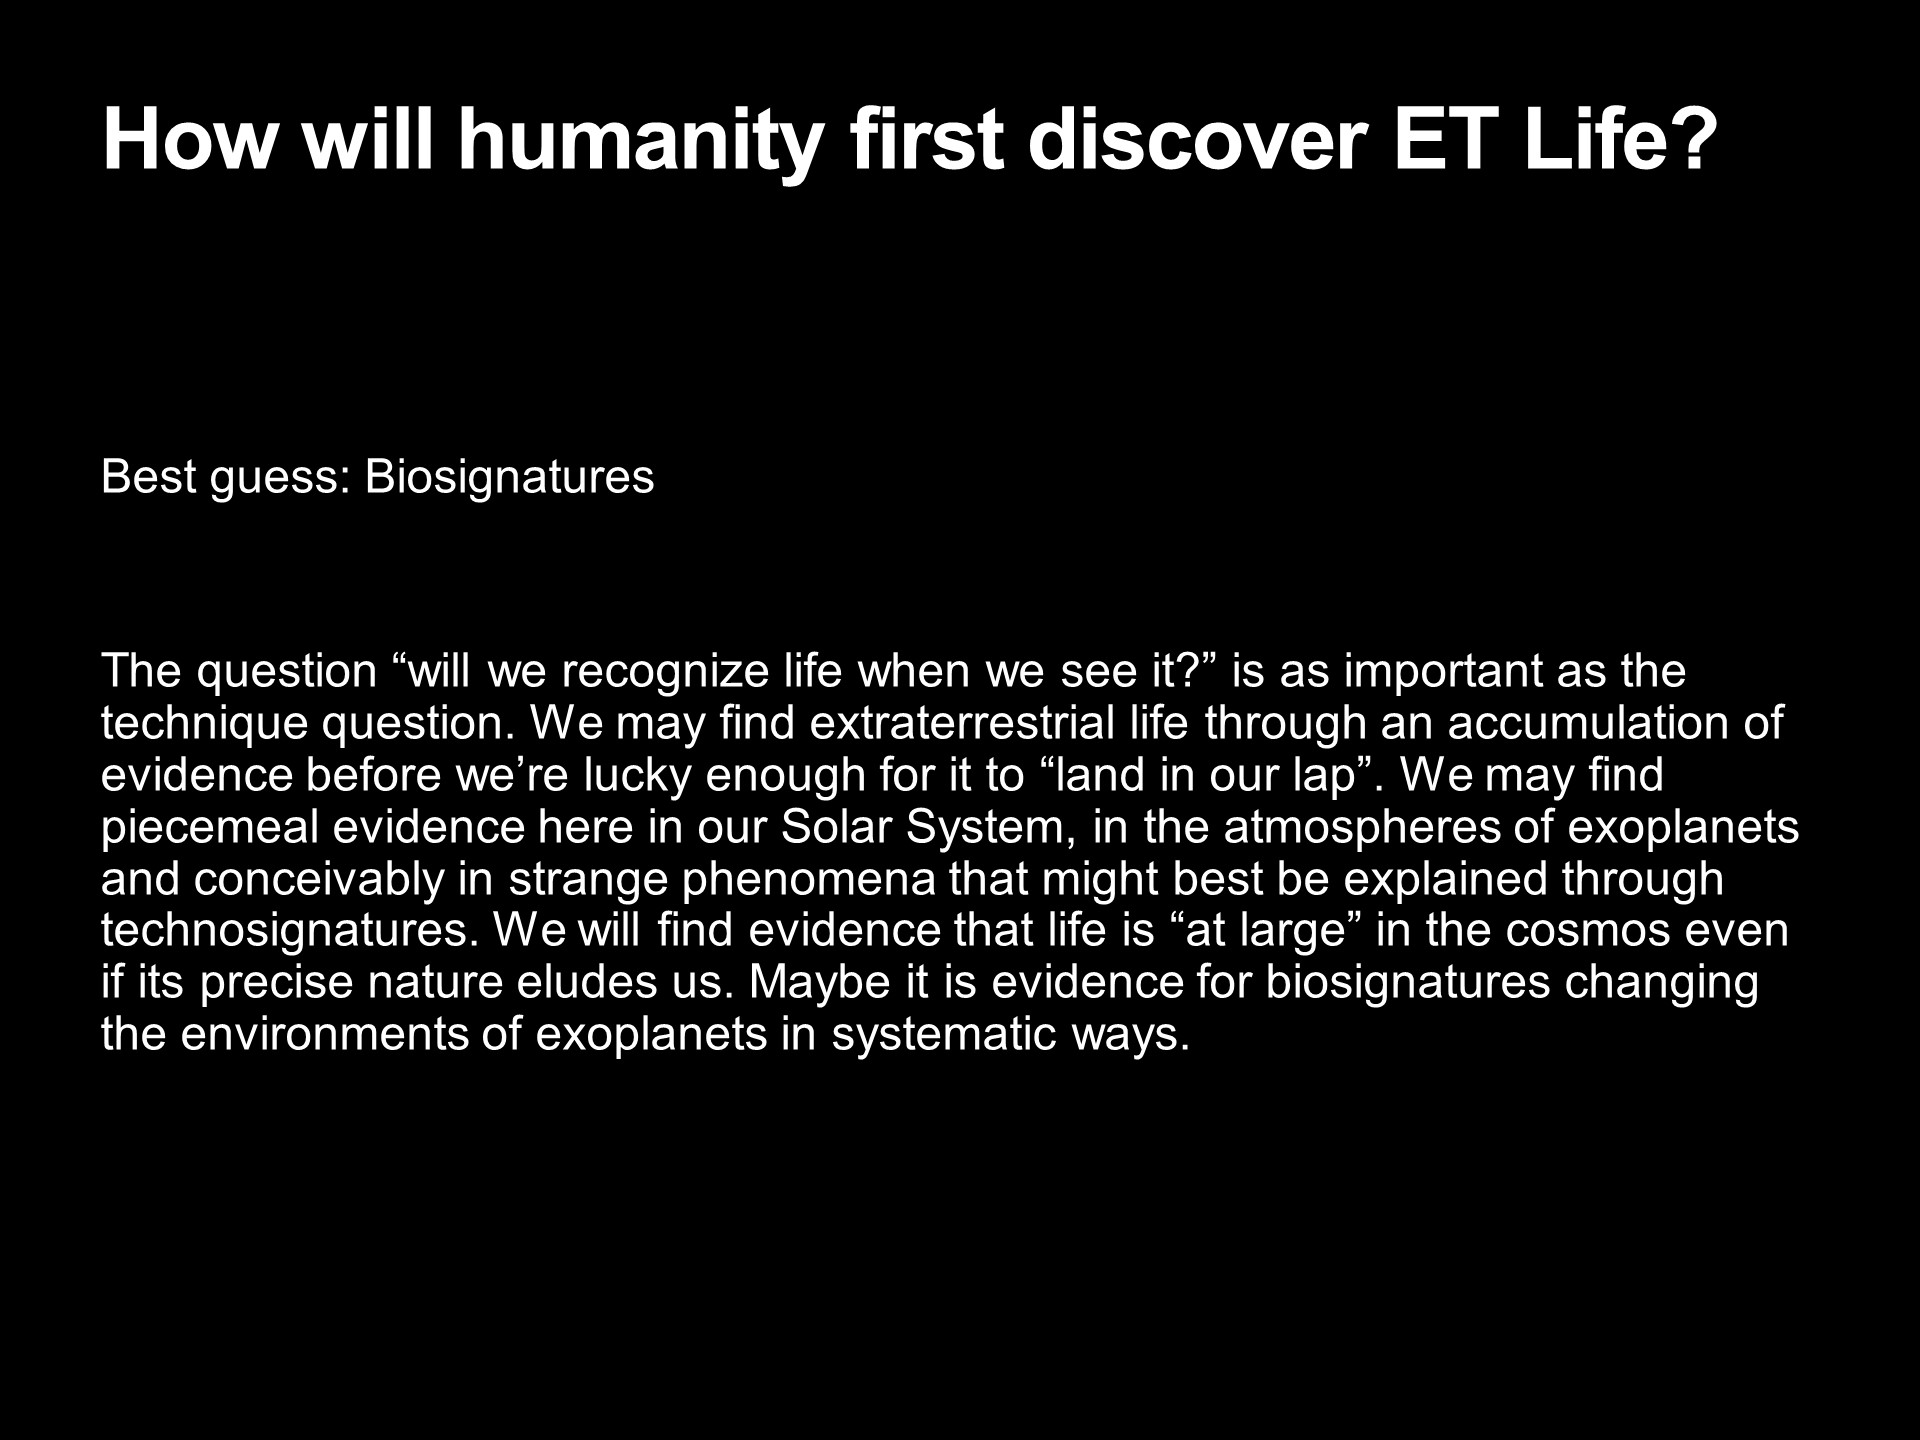 How will humanity first discover ET Life?
Best guess: Biosignatures �
The question �will we recognize life when we see it?� 
is as important as the technique question. We may find 
extraterrestrial life through an accumulation of evidence 
before we�re lucky enough for it to �land in our lap�. 
We may find piecemeal evidence here in our Solar System, 
in the atmospheres of exoplanets and conceivably in 
strange phenomena that might best be explained through 
technosignatures. We will find evidence that life is 
�at large� in the cosmos even if its precise nature eludes us. 
Maybe it is evidence for biosignatures changing the 
environments of exoplanets in systematic ways.